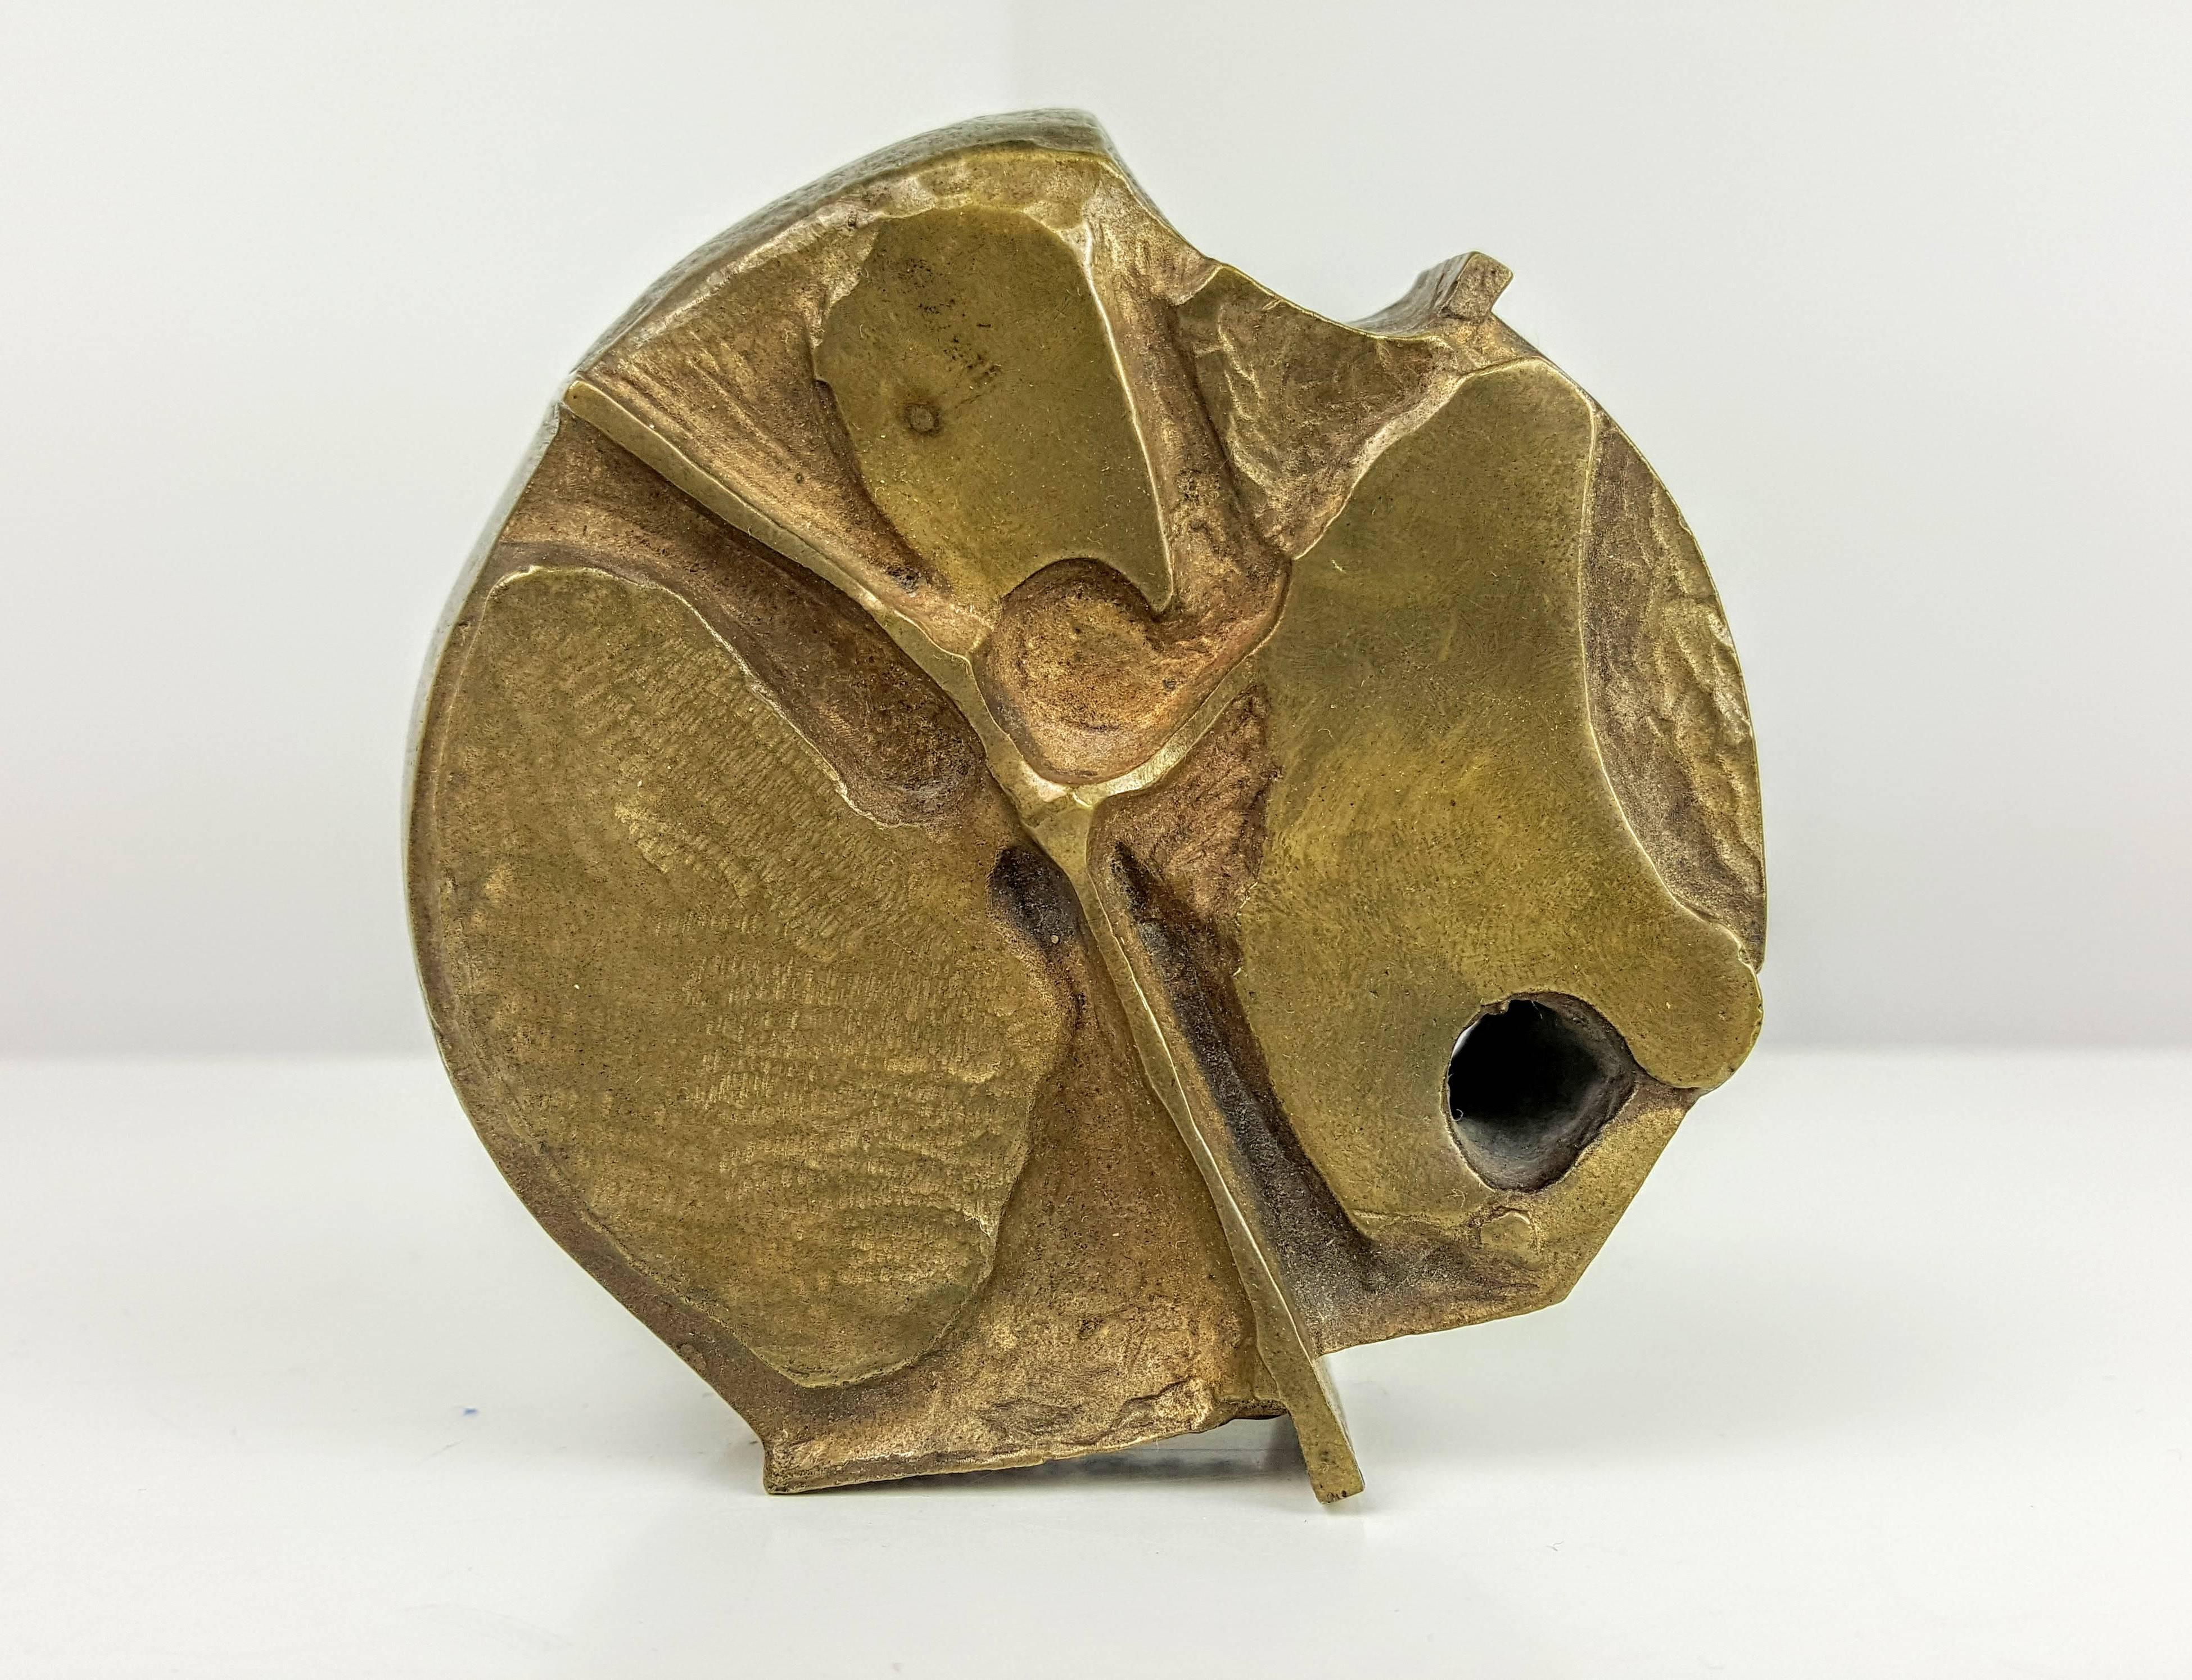 Brutalist cast bronze paperweight or Objet d'Art, Minnesota State Arts Council, 1973. Very heavy and very cool. 

In the style of Paul Evans, Giacometti, Silas Seandel, Bertoia, etc.
 